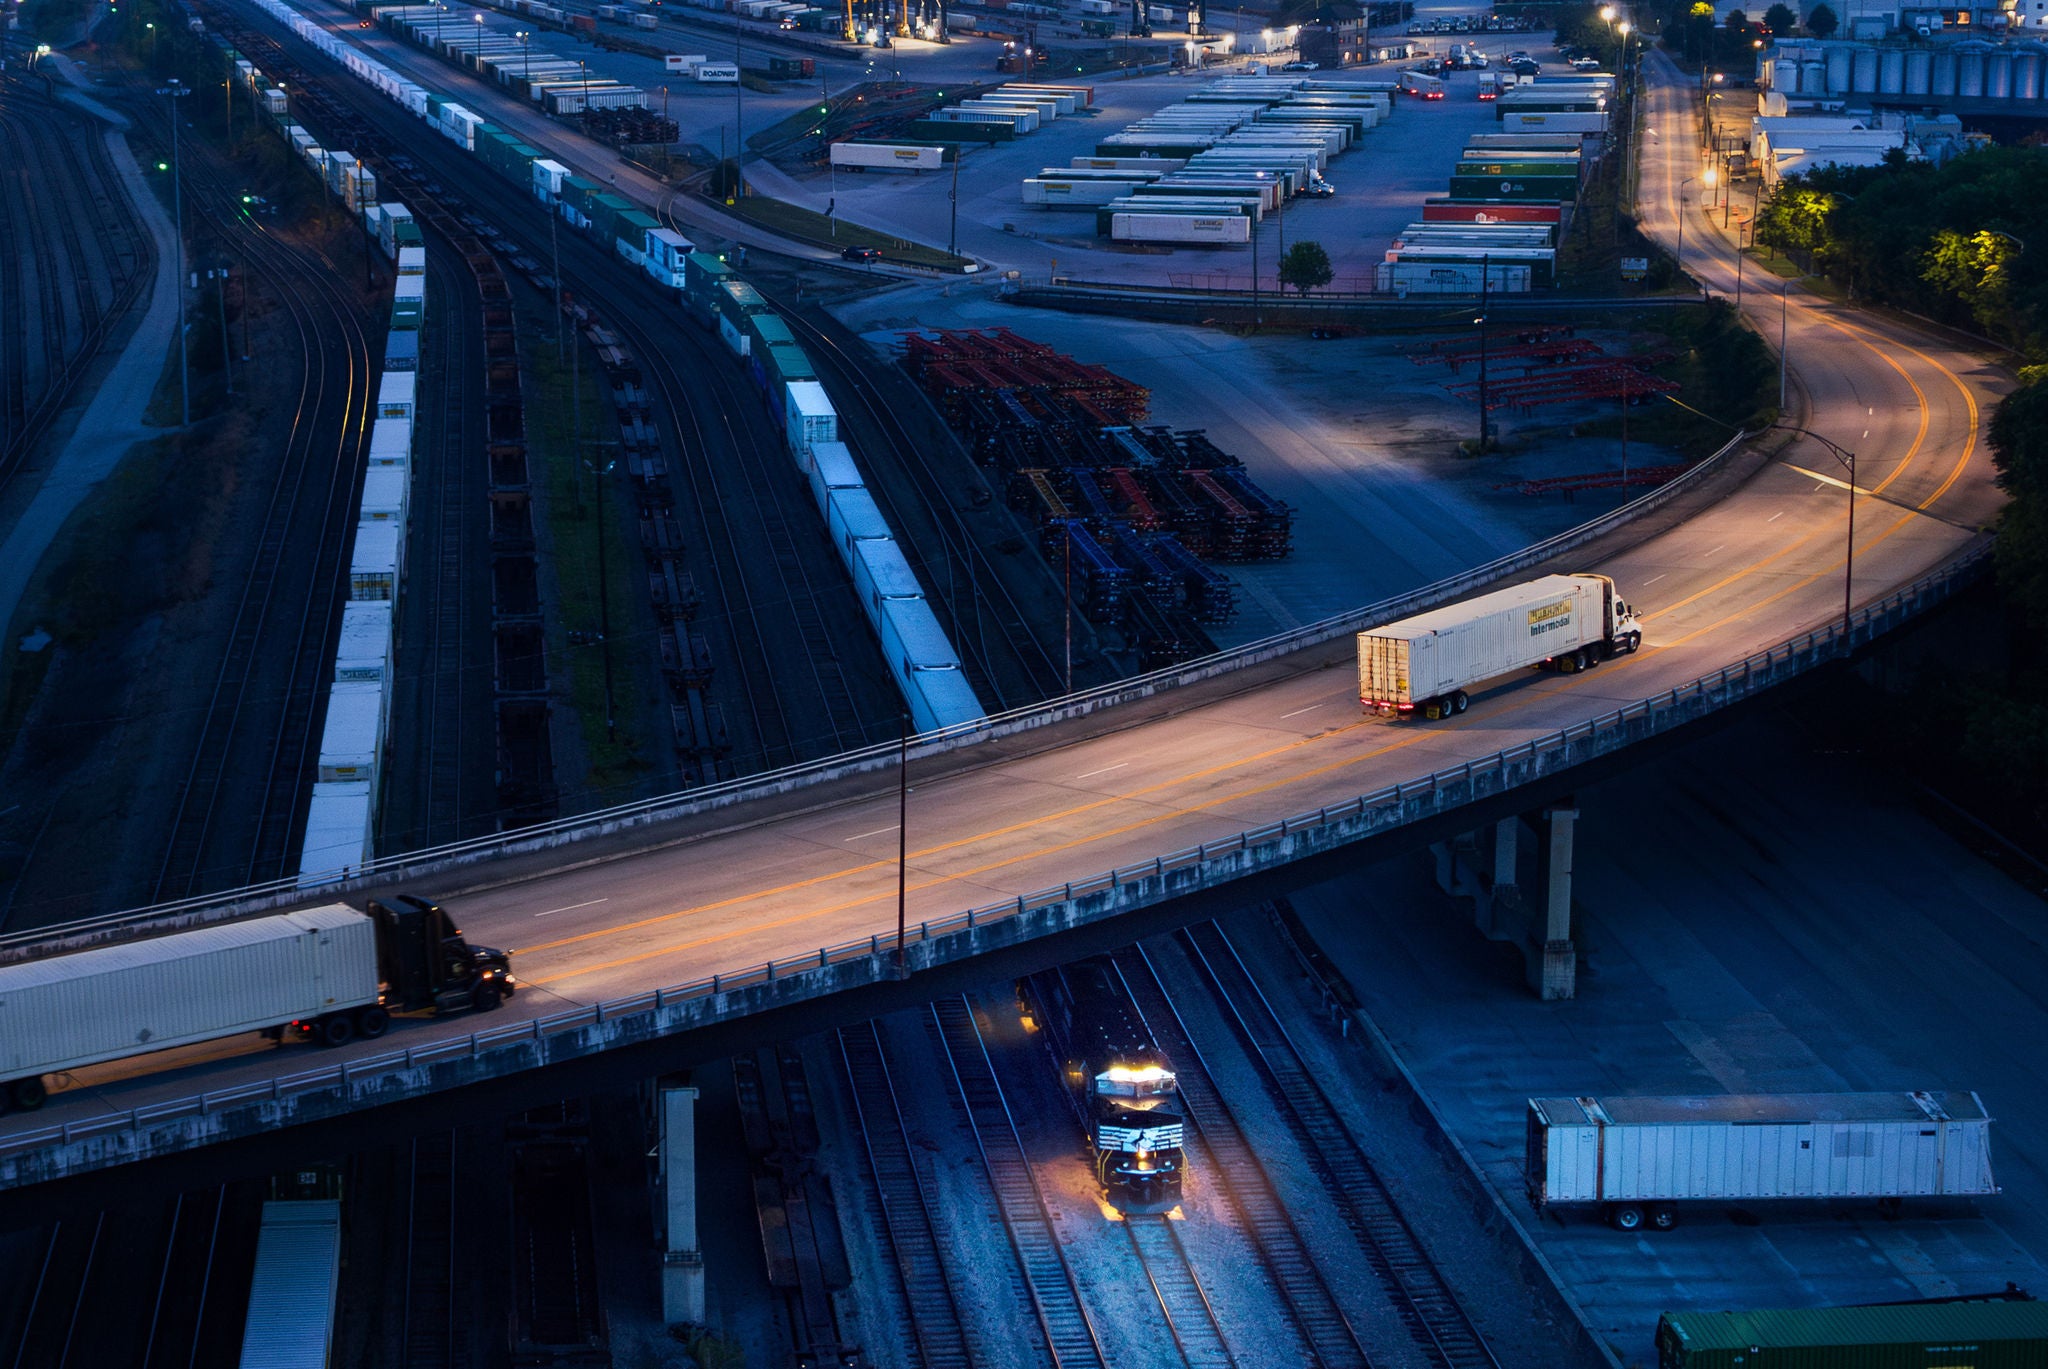 Aerial shot at night of rail freight industry featuring semi-trucks driving into train yard and two trains on rail tracks